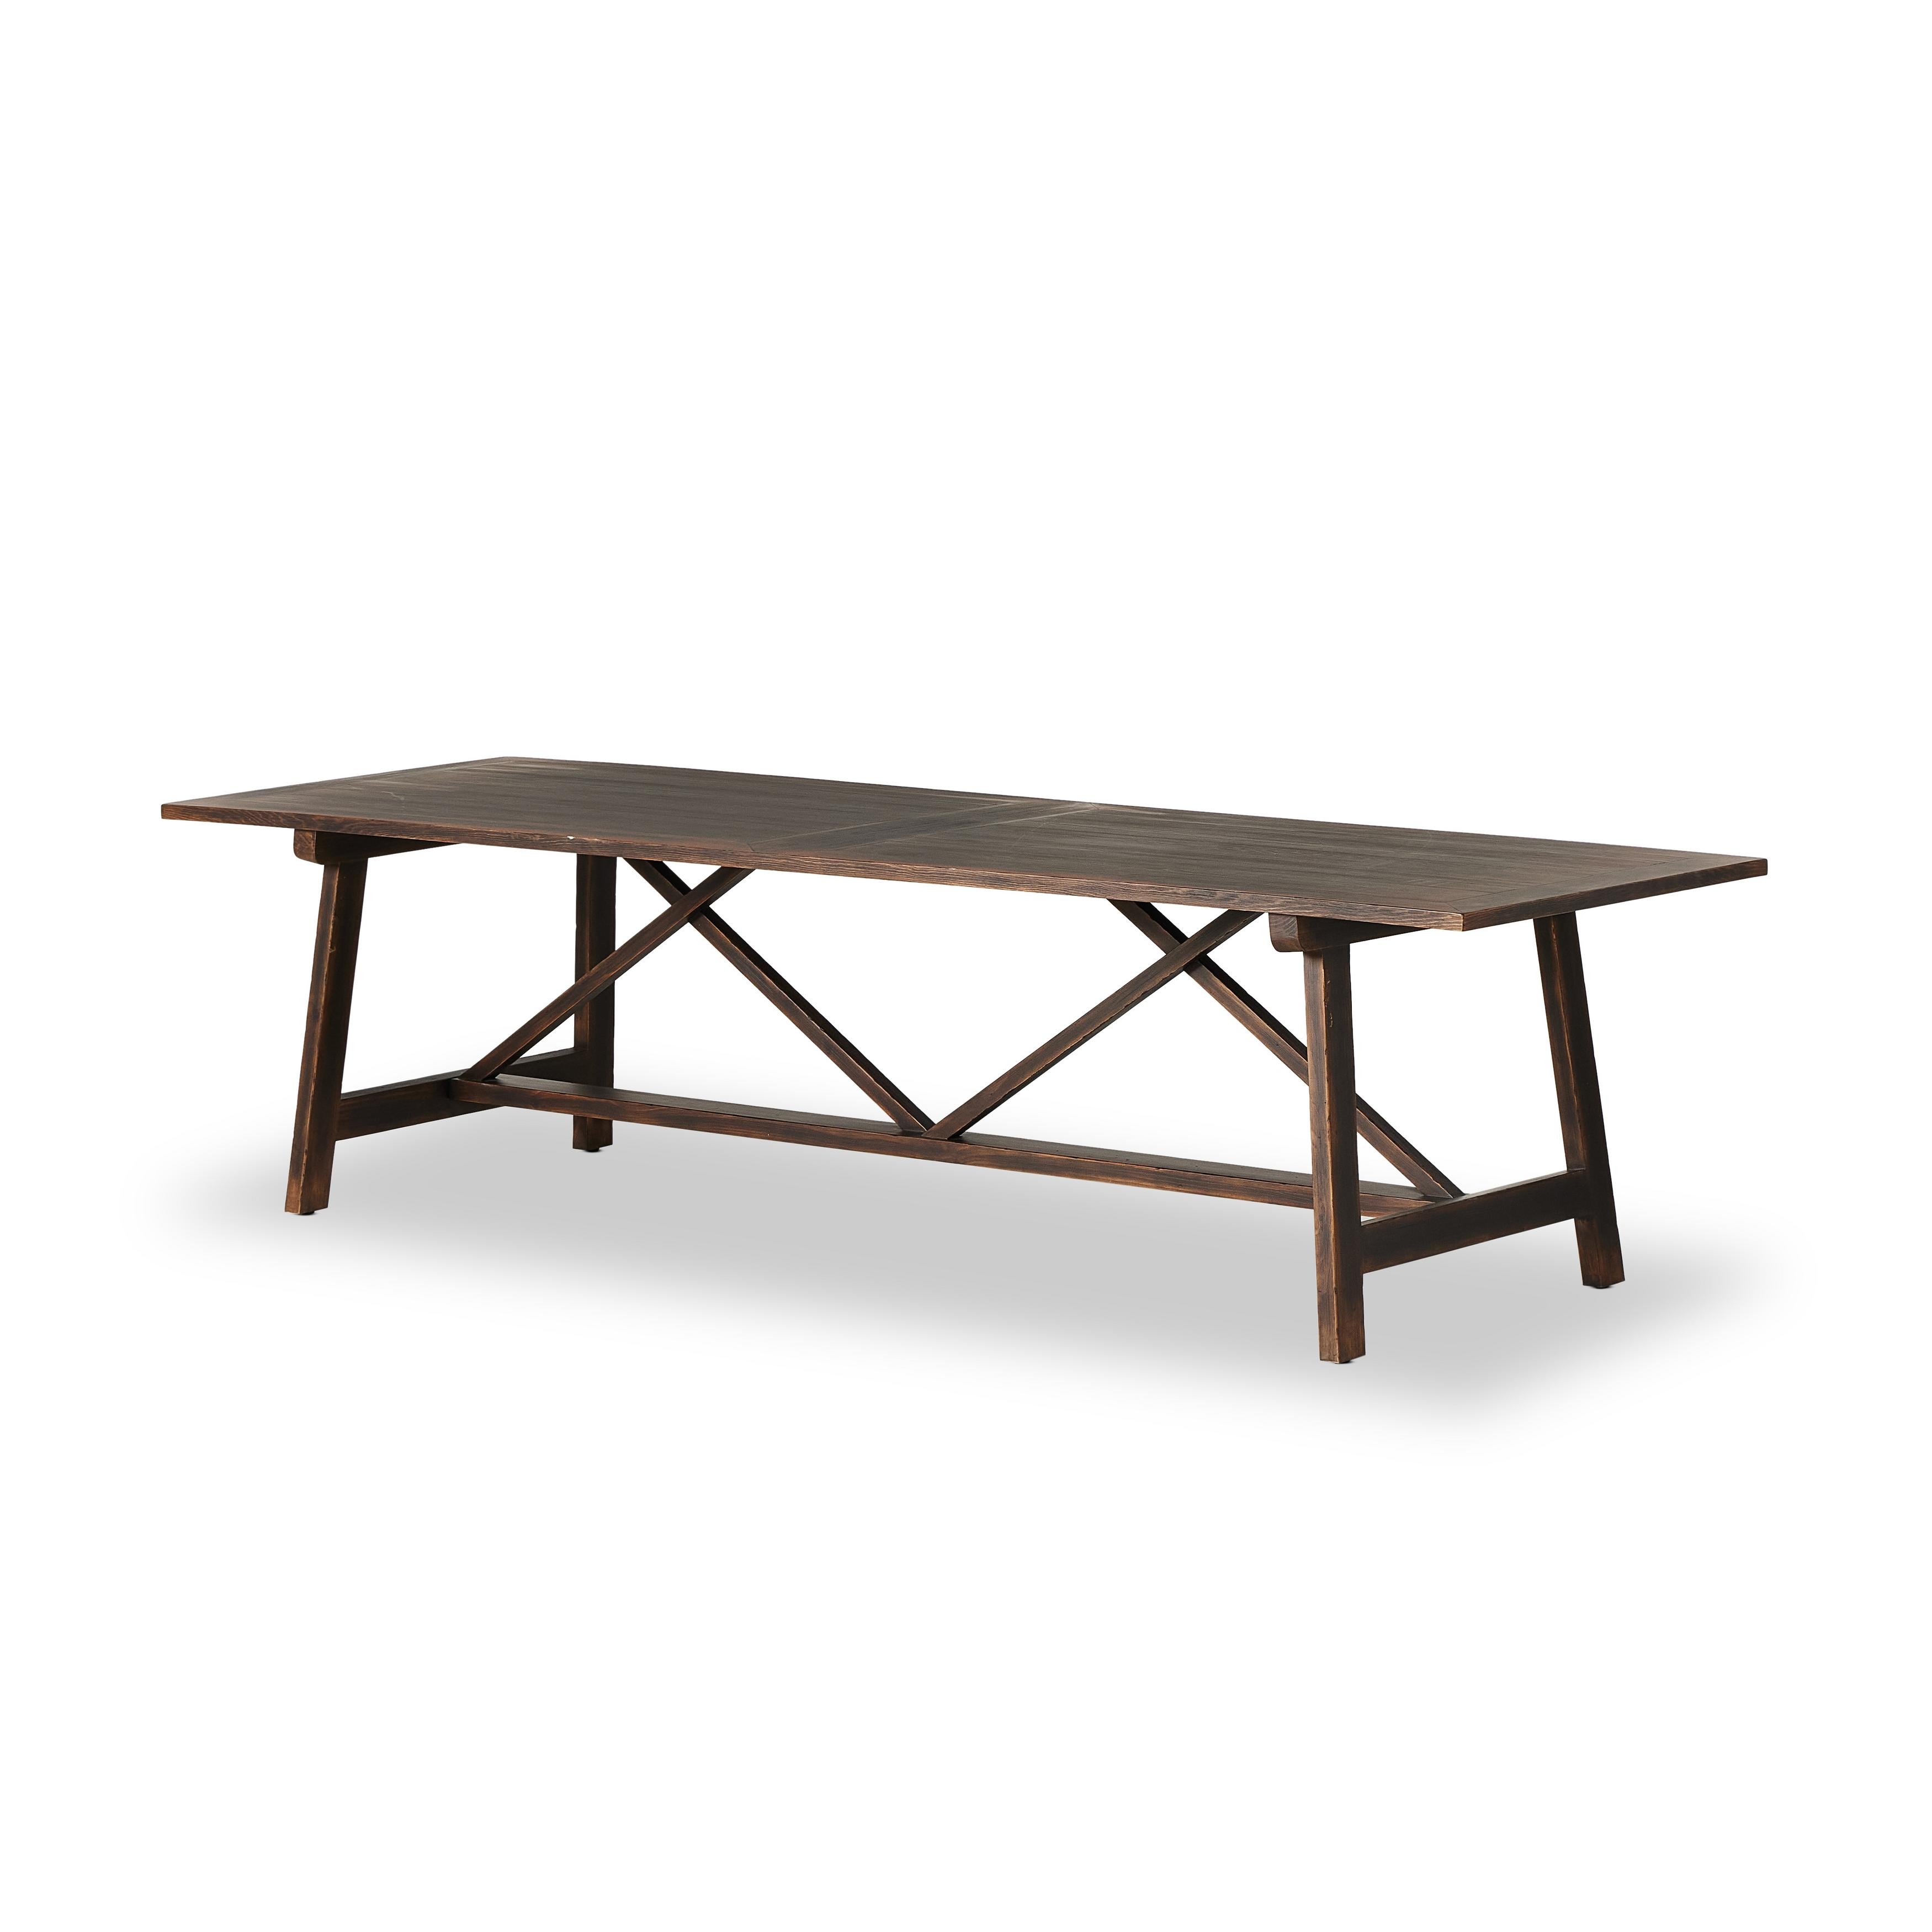 The 1500 Kilometer Dining Table-Agd Brwn - Image 0